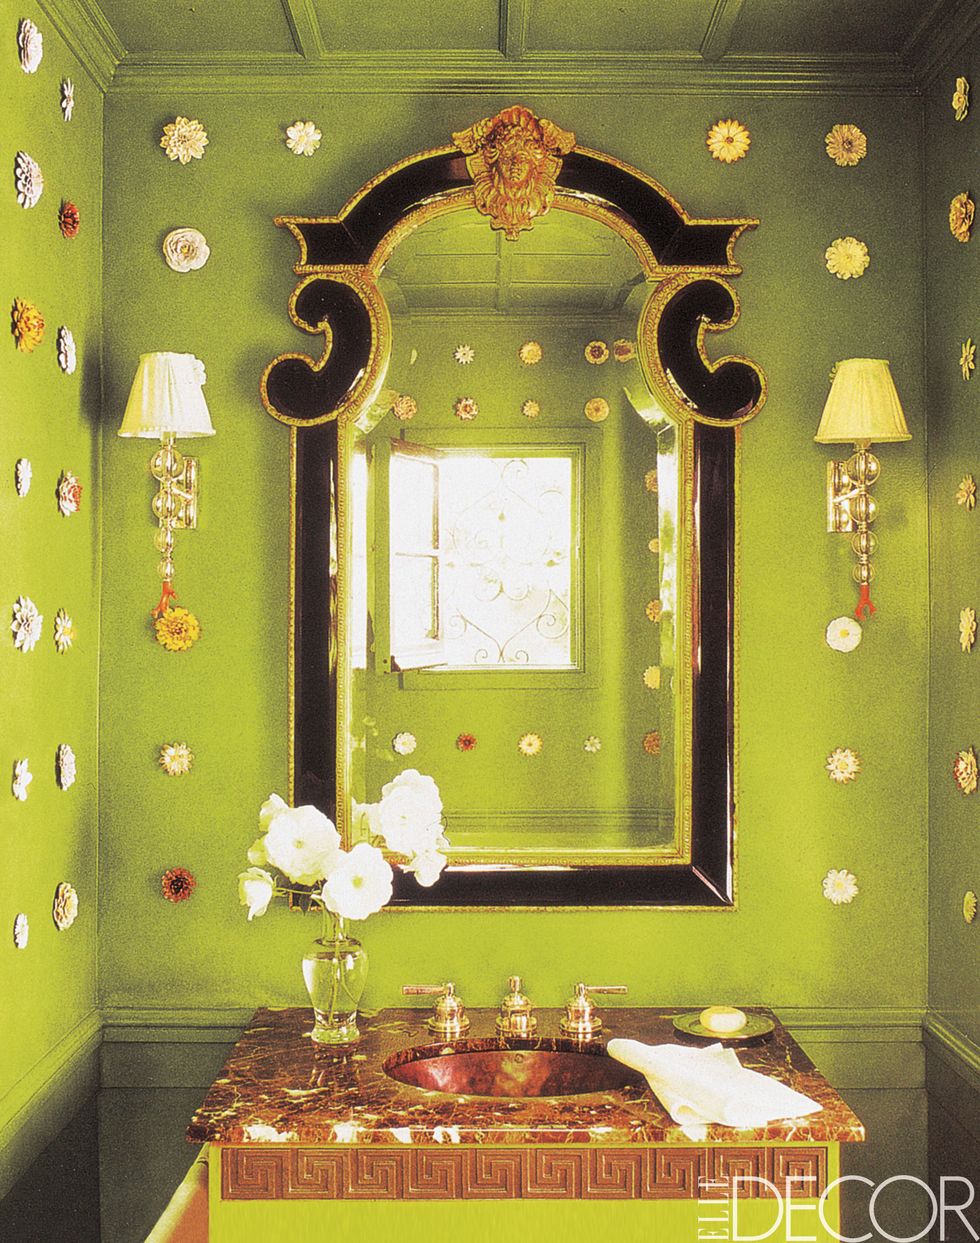 20 Ways to Decorate With Green in the Bathroom